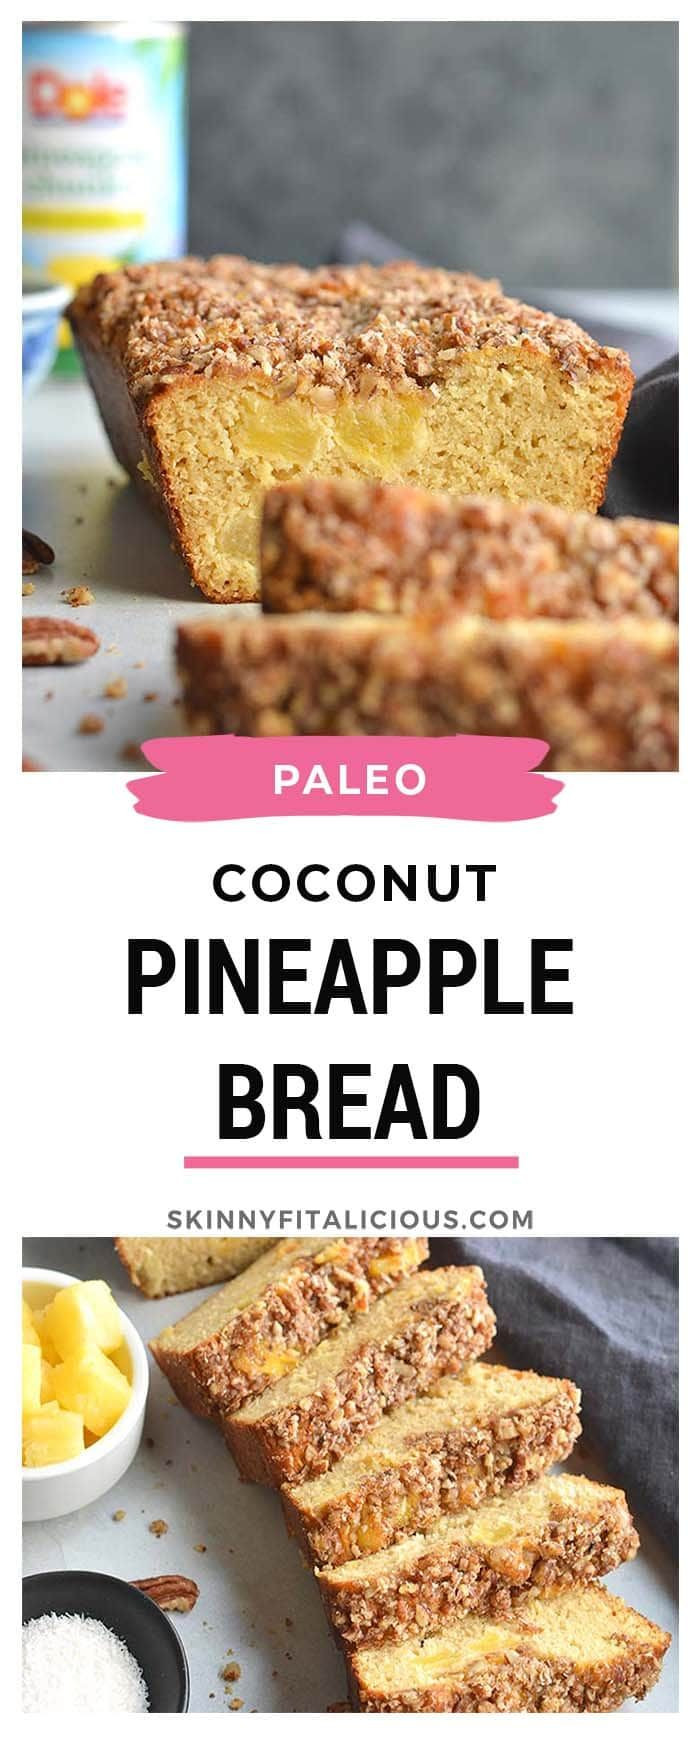 Low Calorie Paleo Desserts
 Healthy Coconut Pineapple Bread is a simple wholesome